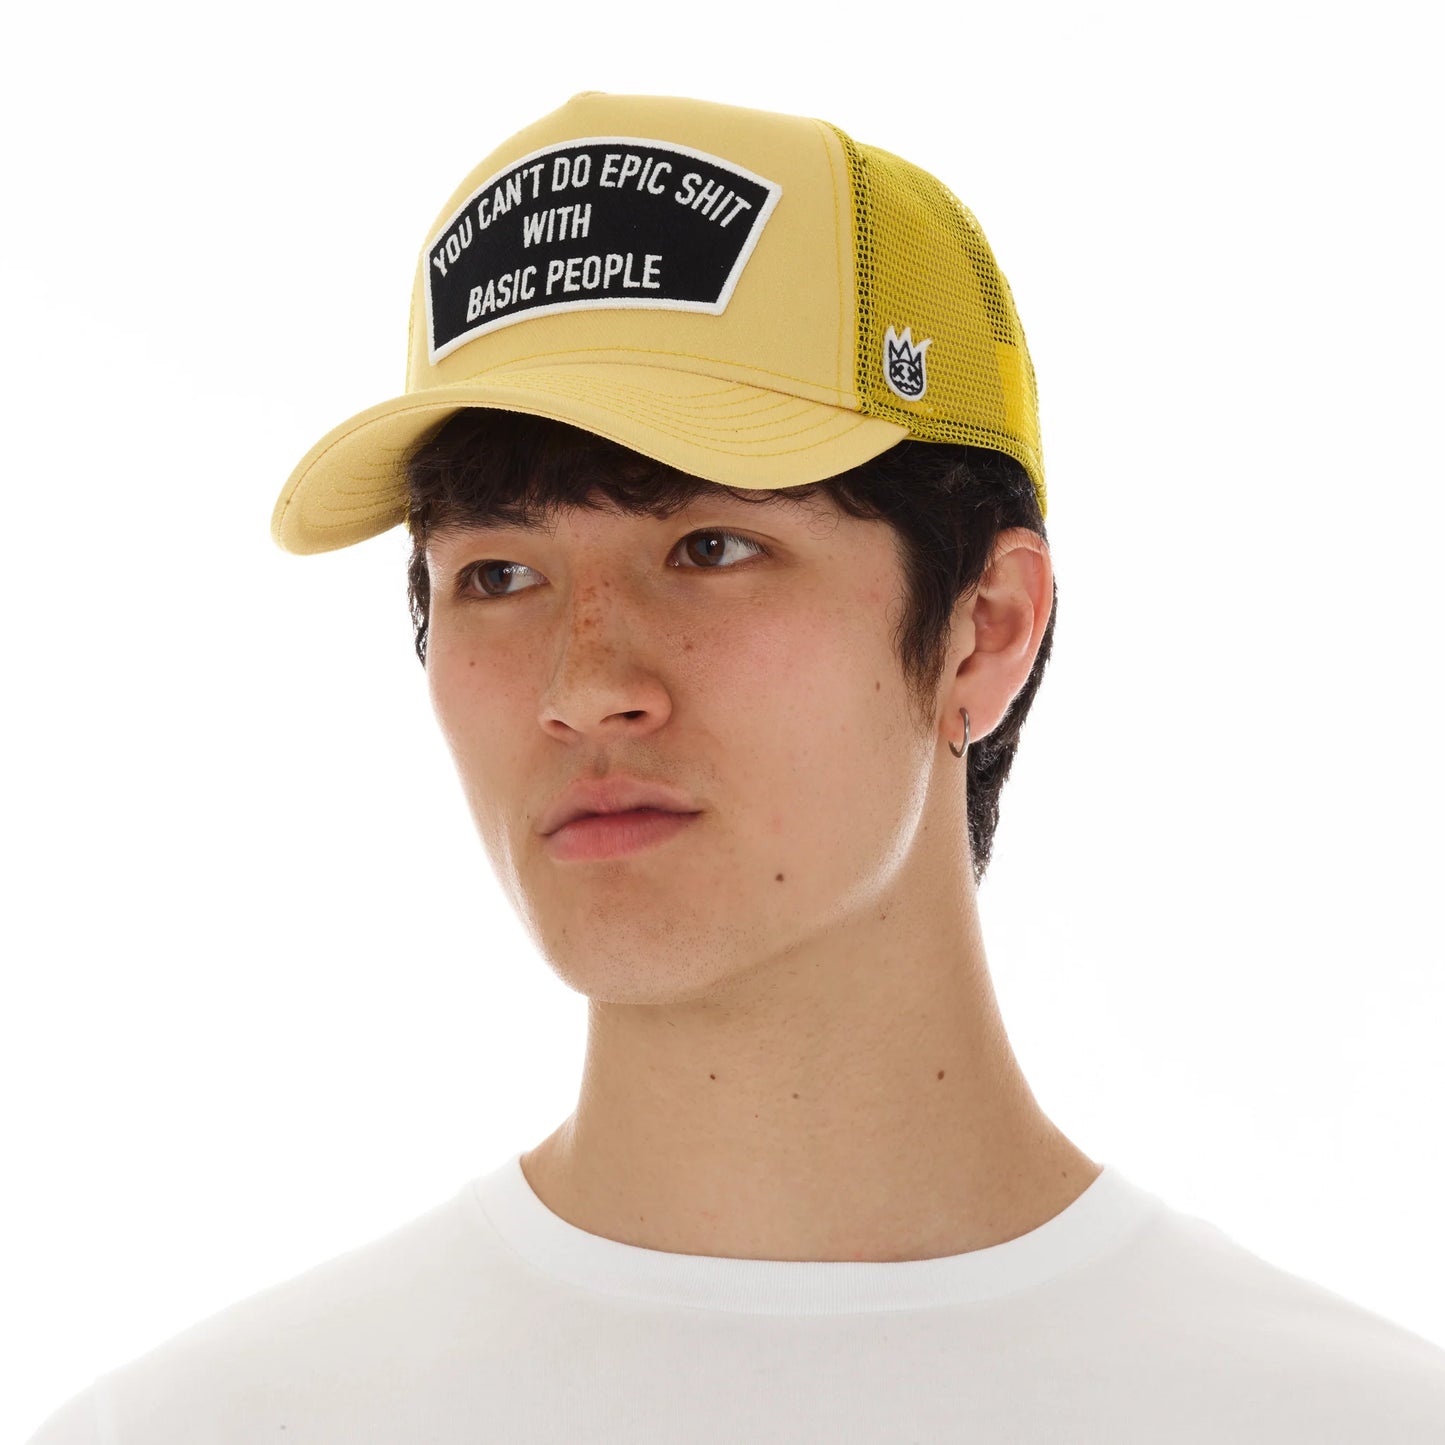 "CAN'T DO EPIC SHIT" MESH BACK TRUCKER CURVED VISOR IN VINTAGE YELLOW